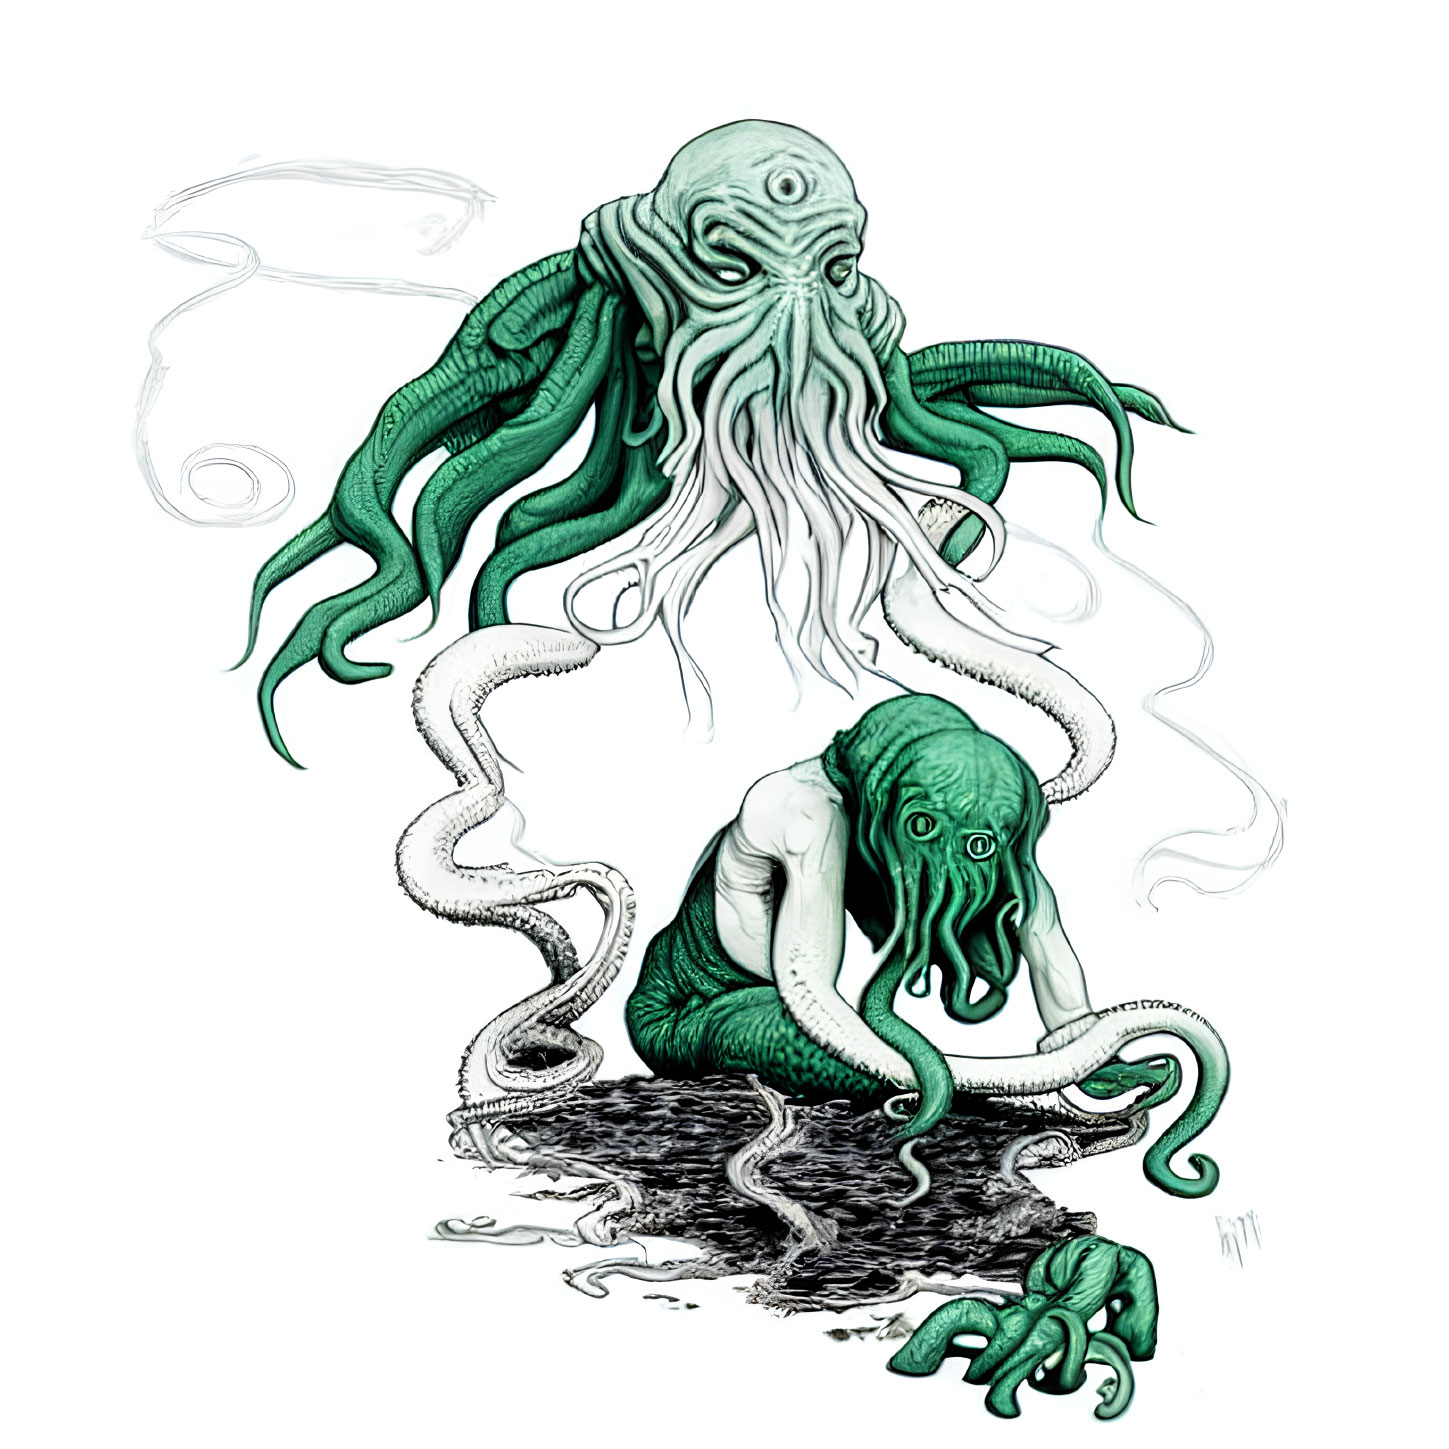 Illustration of two humanoid octopus creatures on white background